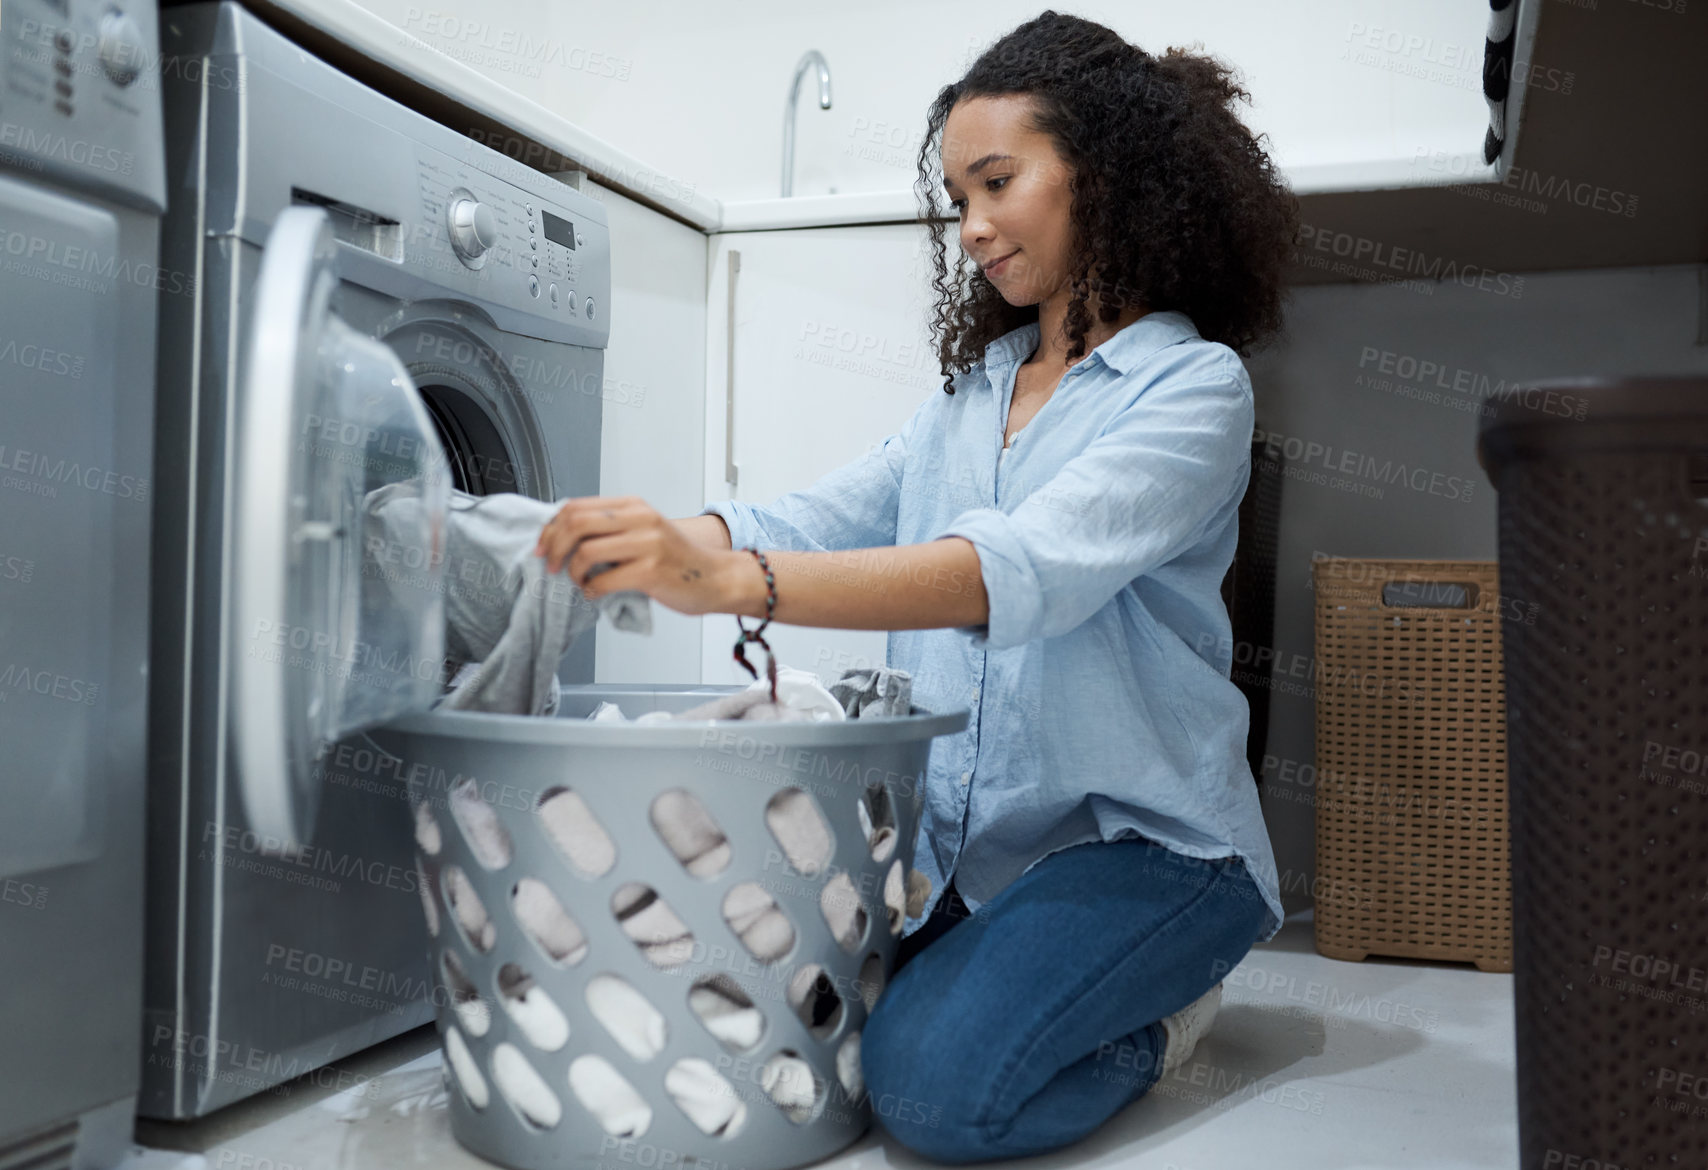 Buy stock photo Shot of a young woman preparing to wash a load of laundry at home